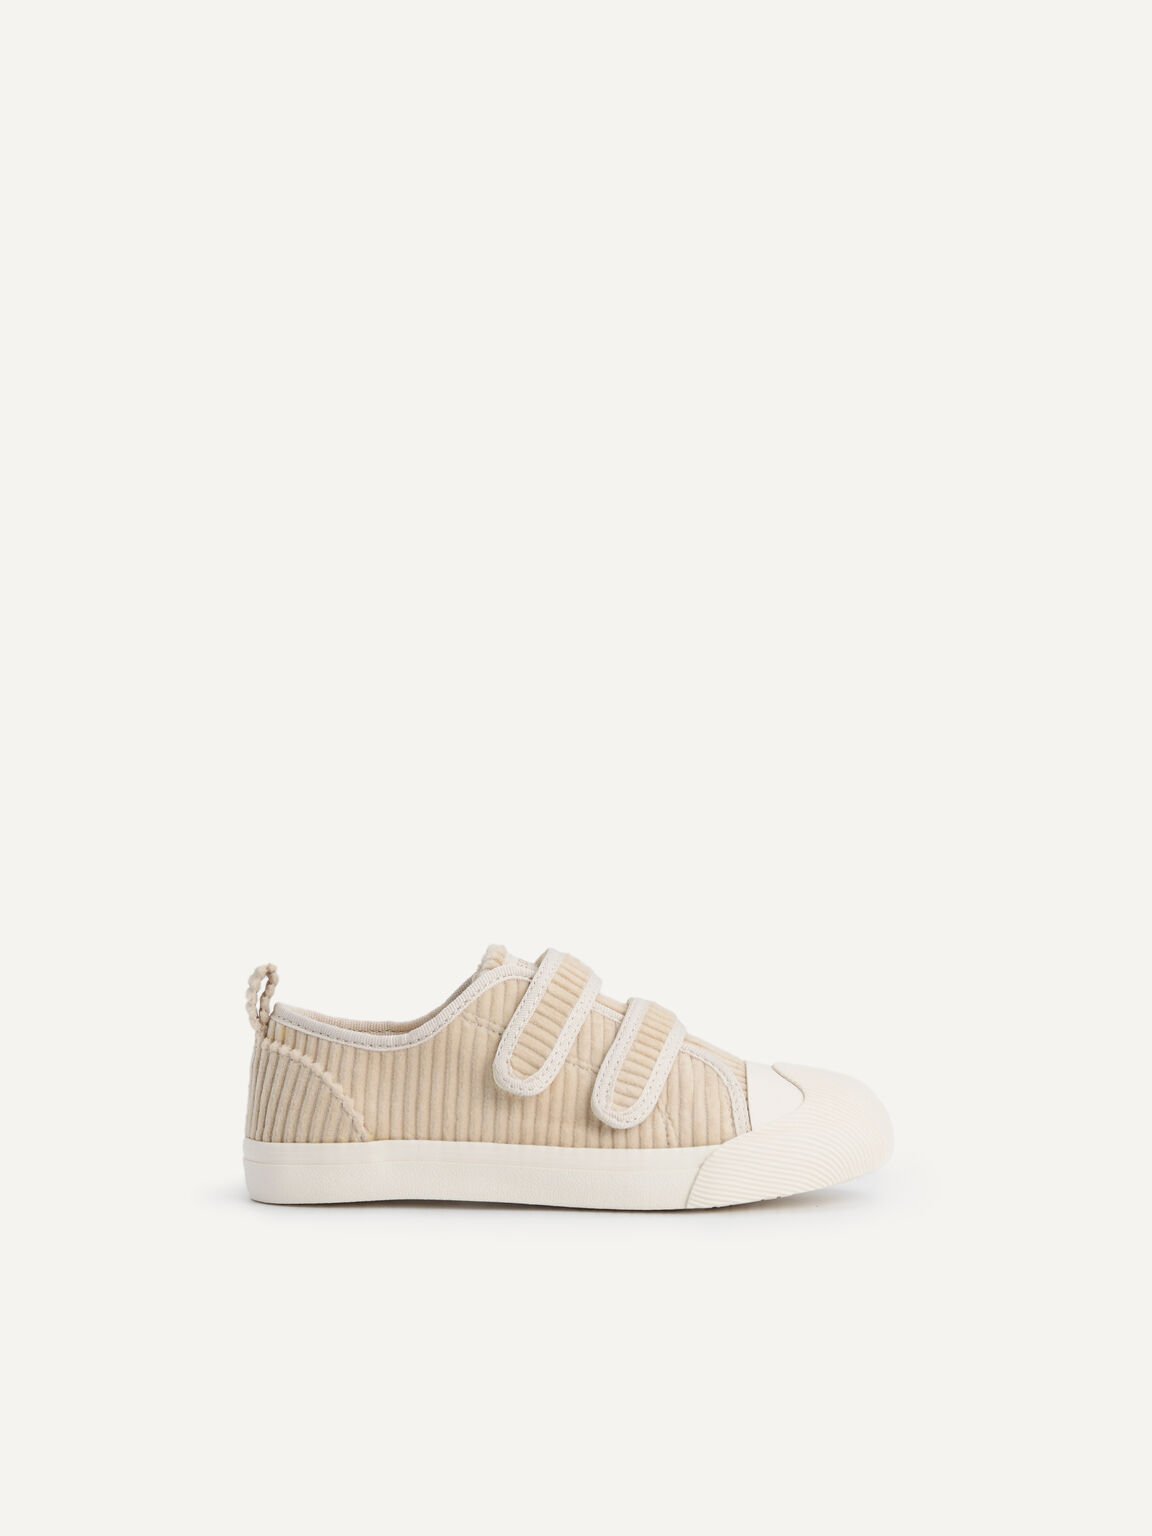 Corduroy Sneakers, Taupe